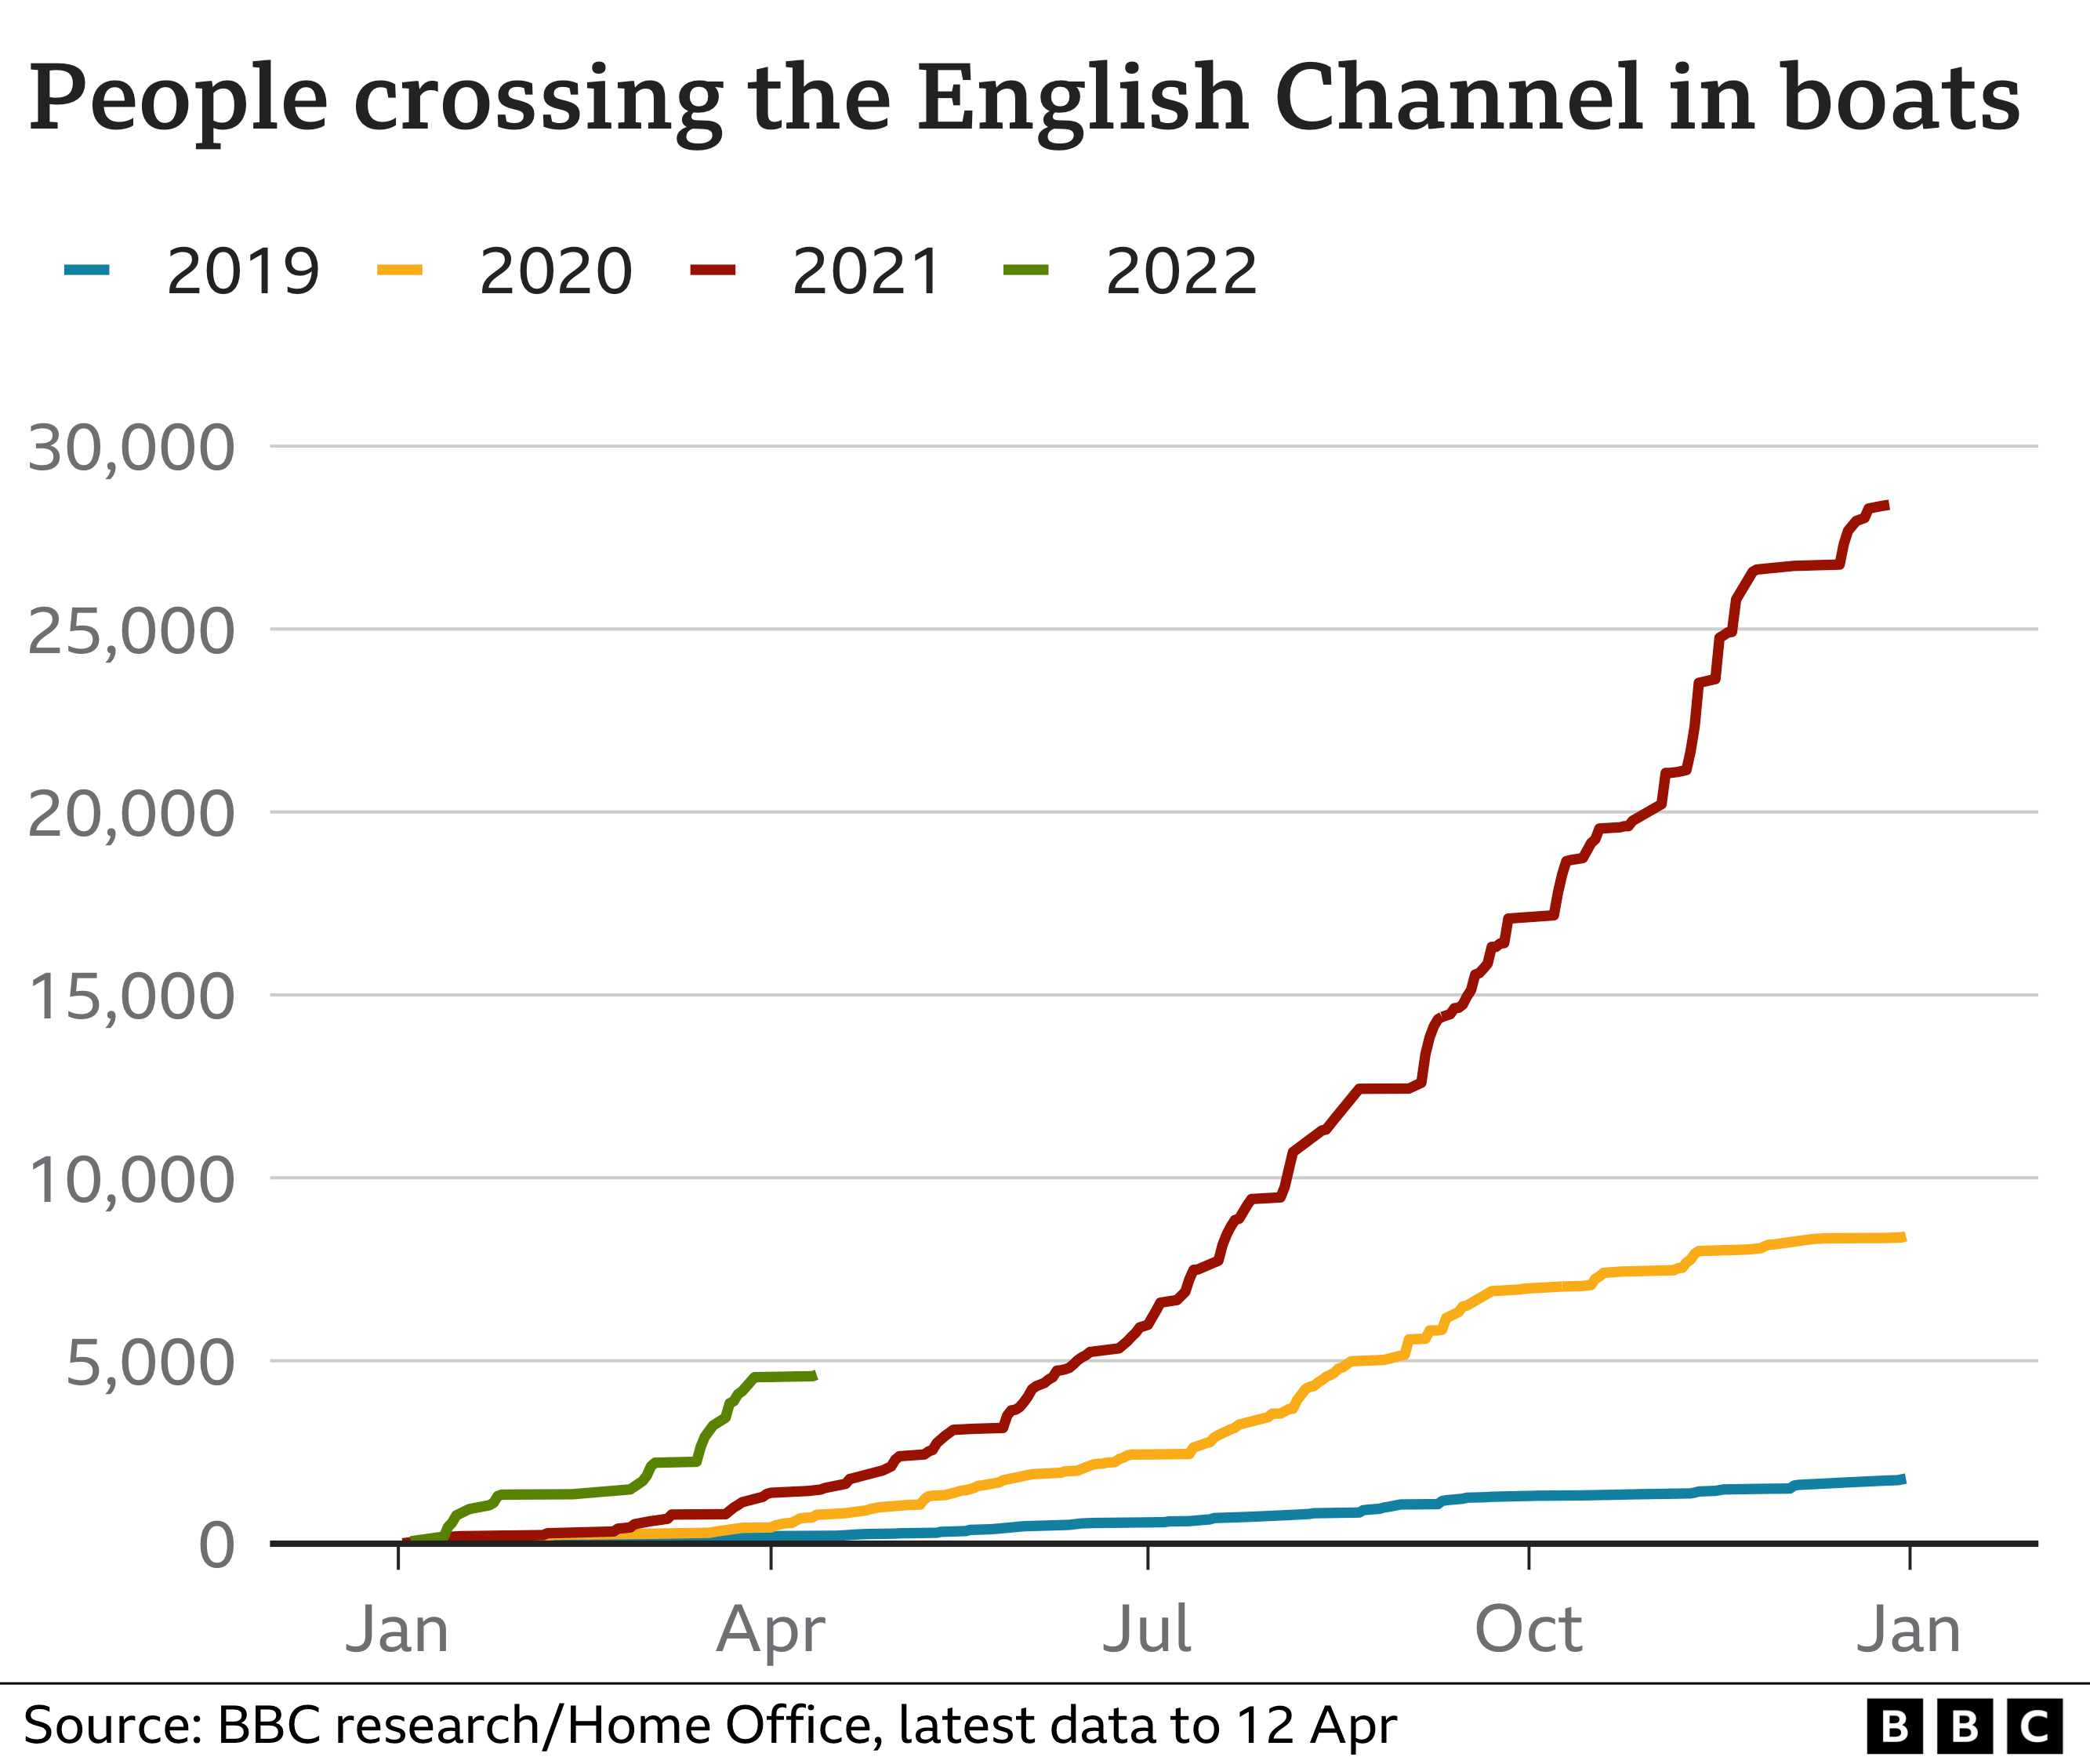 People cross the English Channel by boat